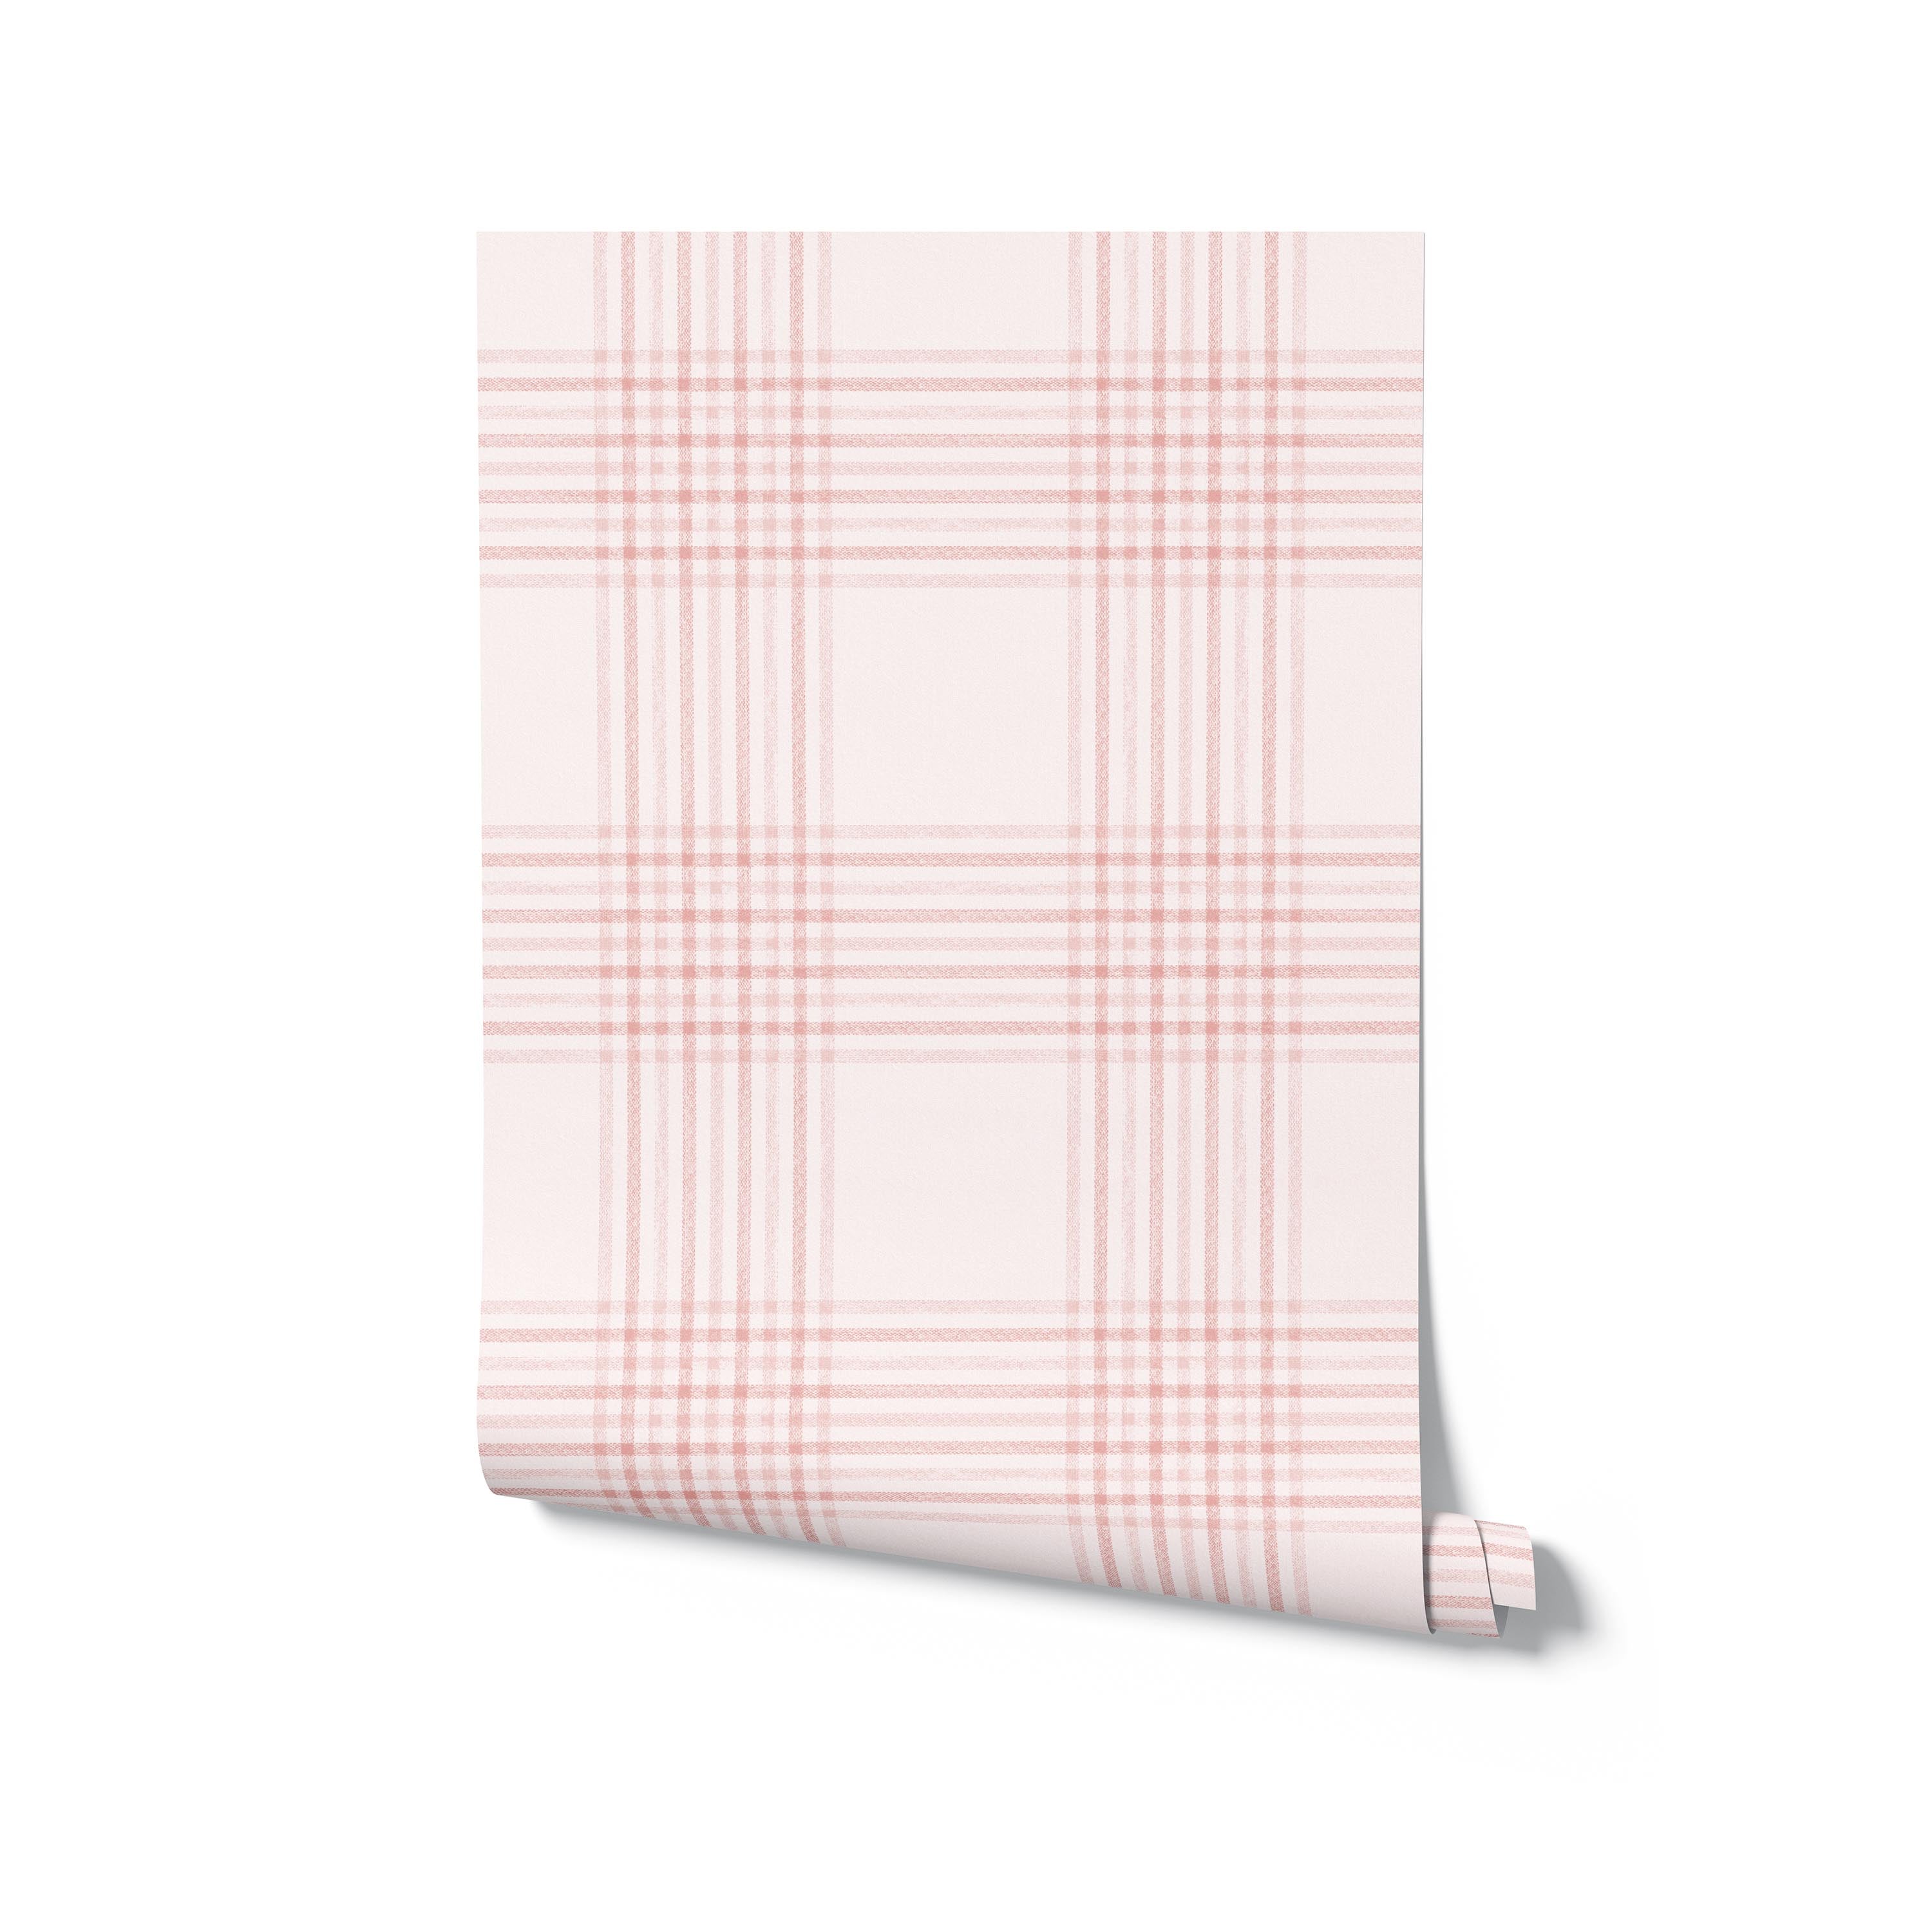 A roll of pink plaid wallpaper unrolled to display the full pattern. The design features a delicate checkered pattern in soft pink hues with intersecting lines. The classic plaid look is ideal for adding a touch of warmth and charm to any room.